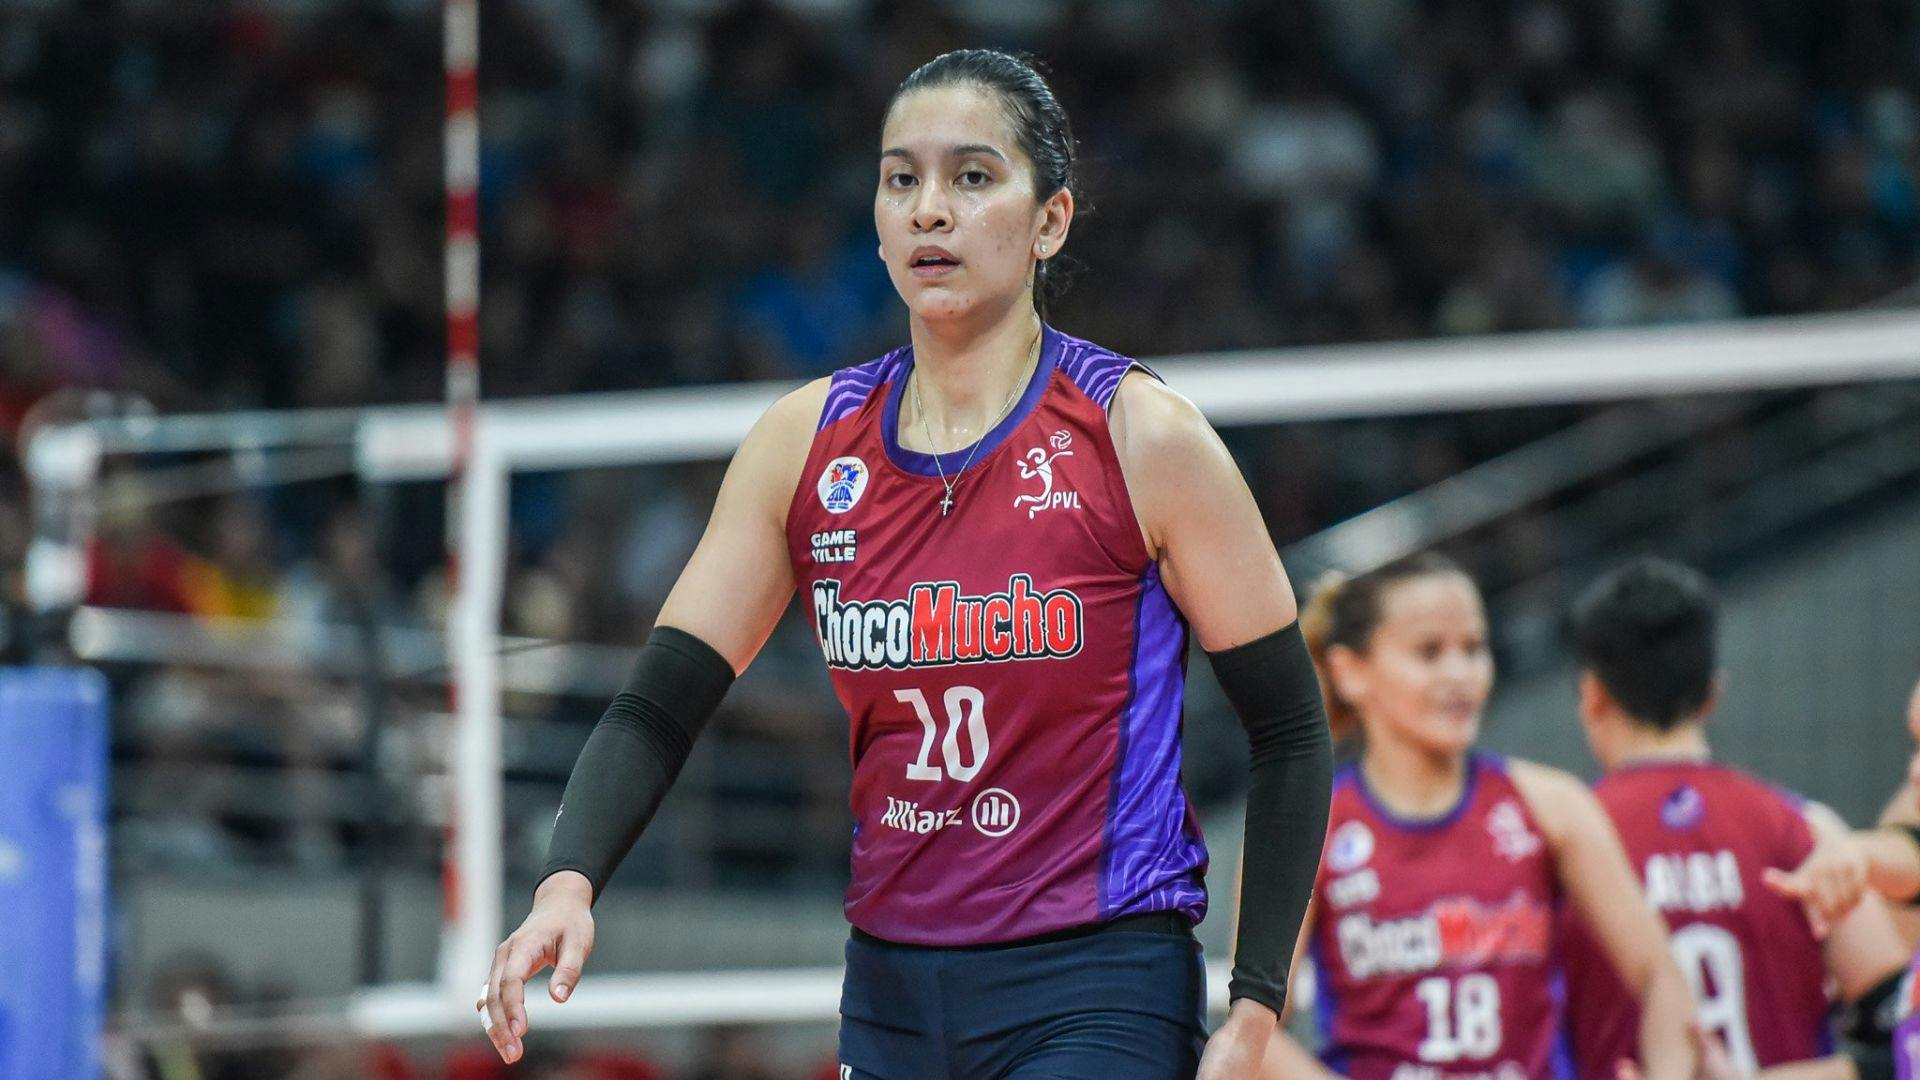 PVL: Kat Tolentino expected to be back for Choco Mucho amid recovery from auditory condition